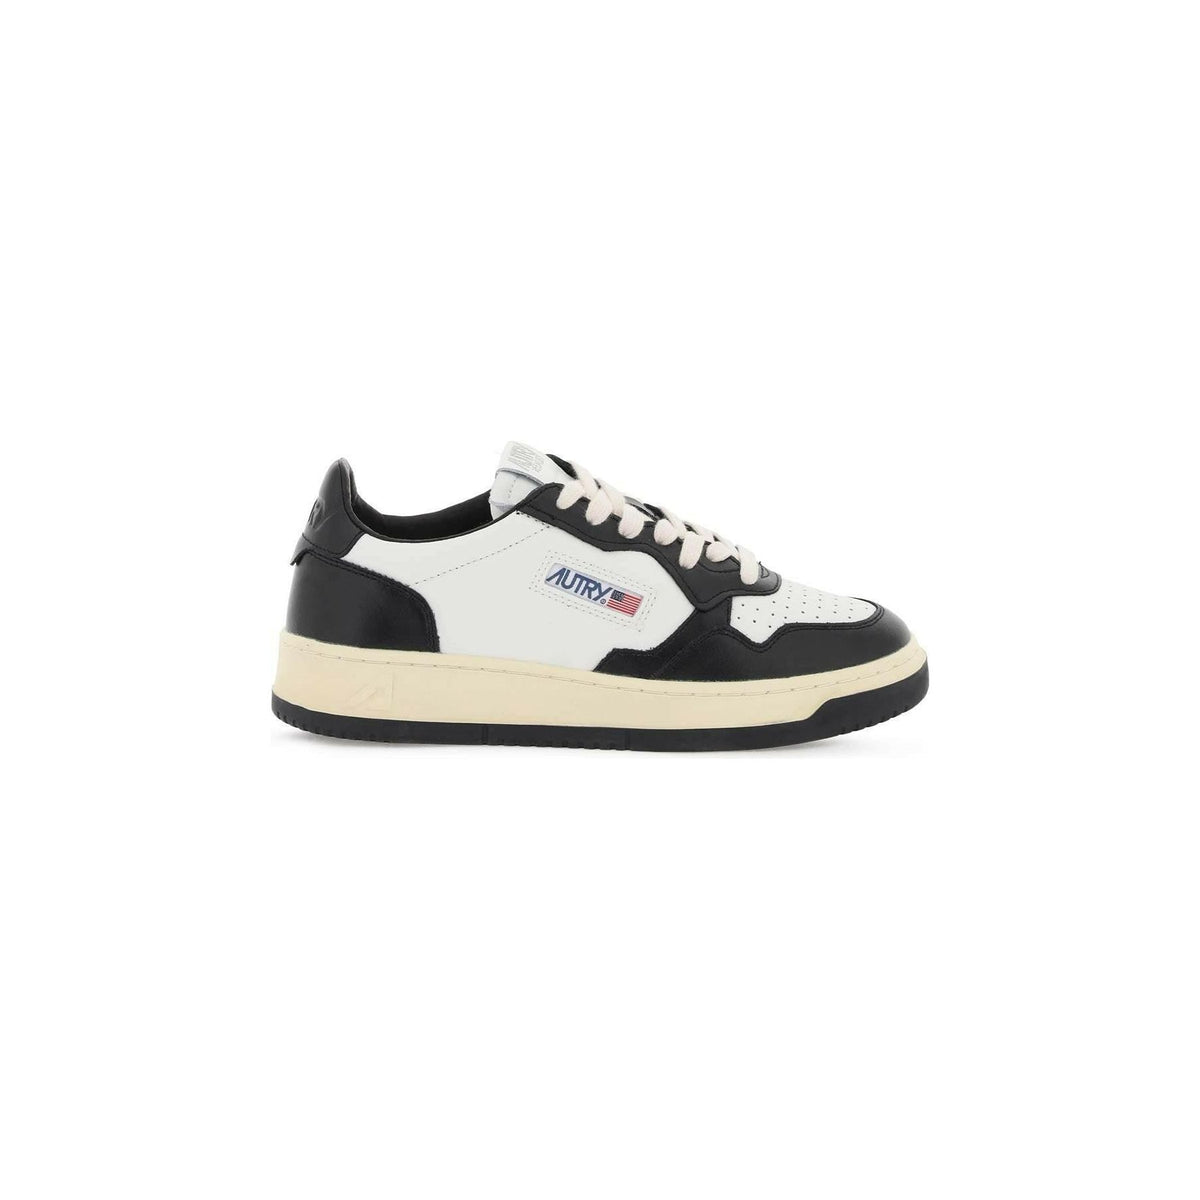 White and Black Medalist Low Leather Sneakers AUTRY JOHN JULIA.